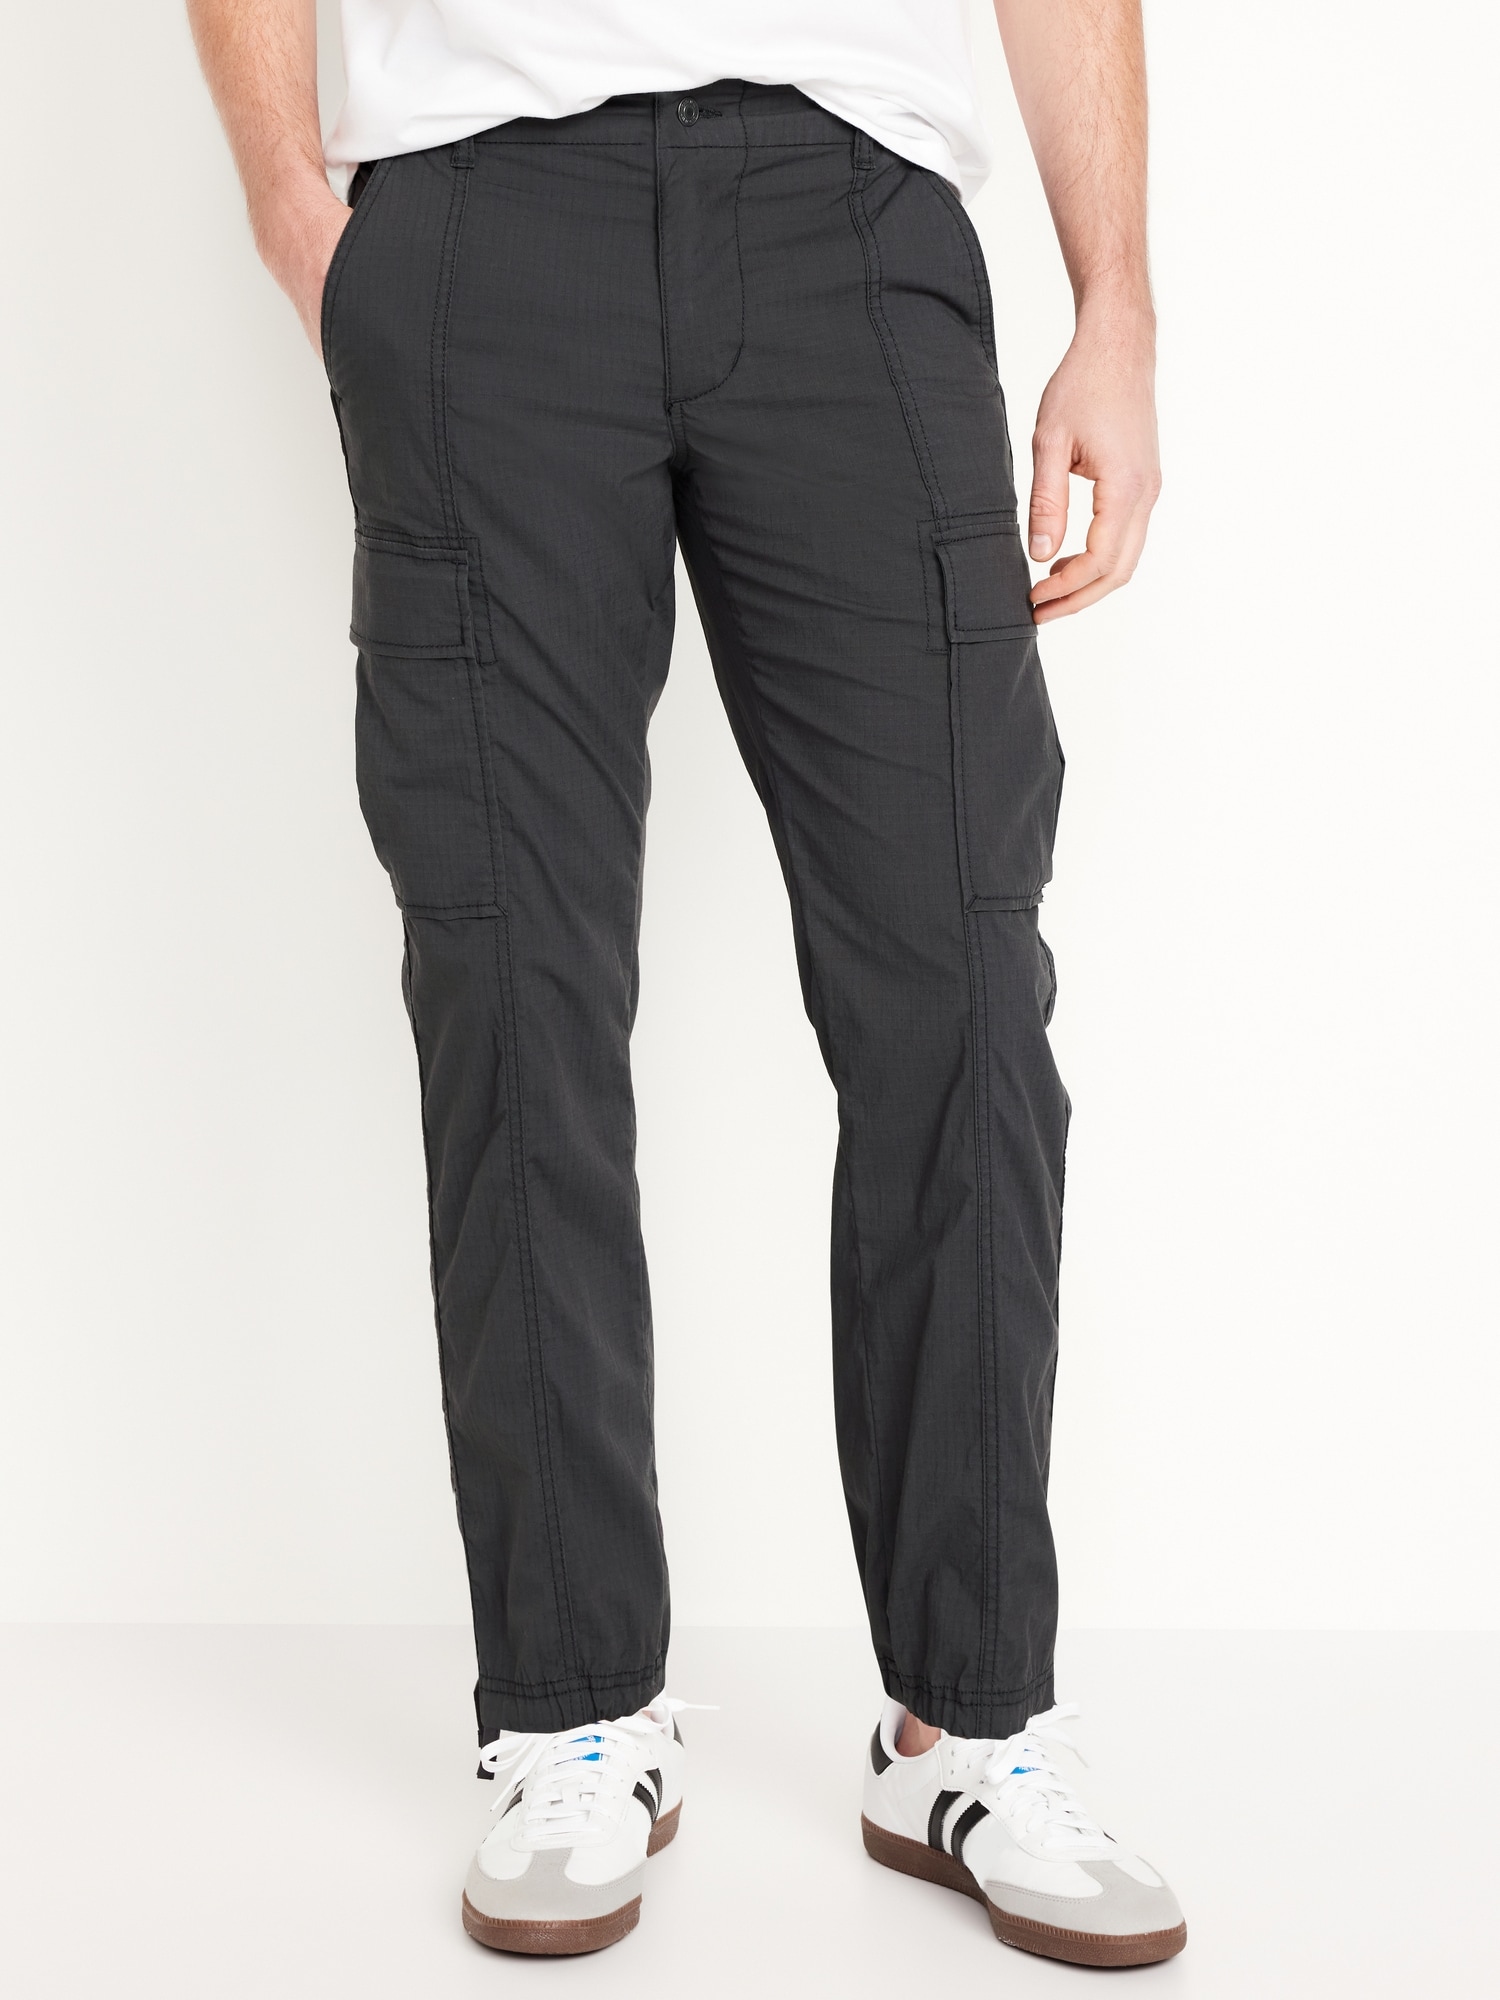 Old Navy Men's Straight Ripstop Cargo Pants - - Size Xs